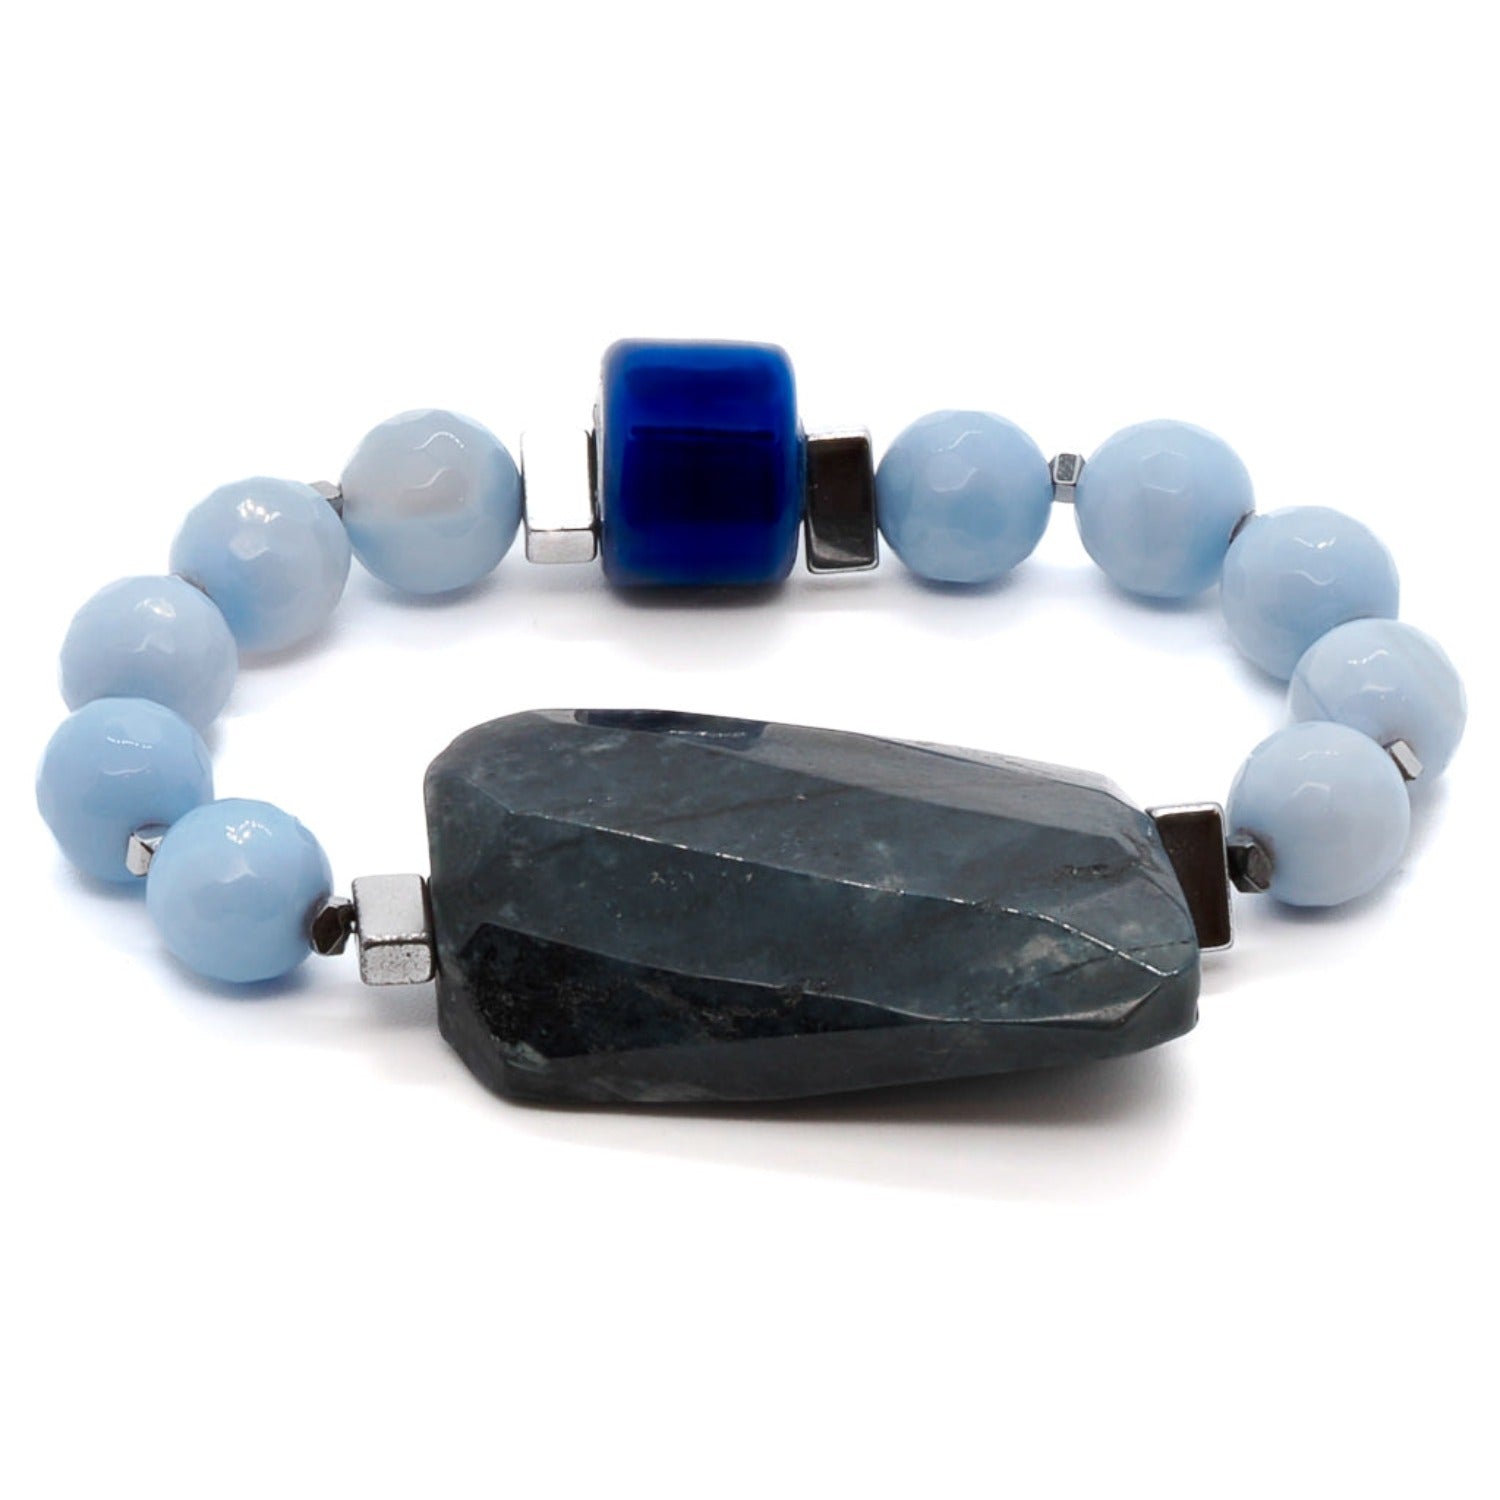 Blue Lace Agate and Jasper Stone Bracelet for Inner Peace and Balance